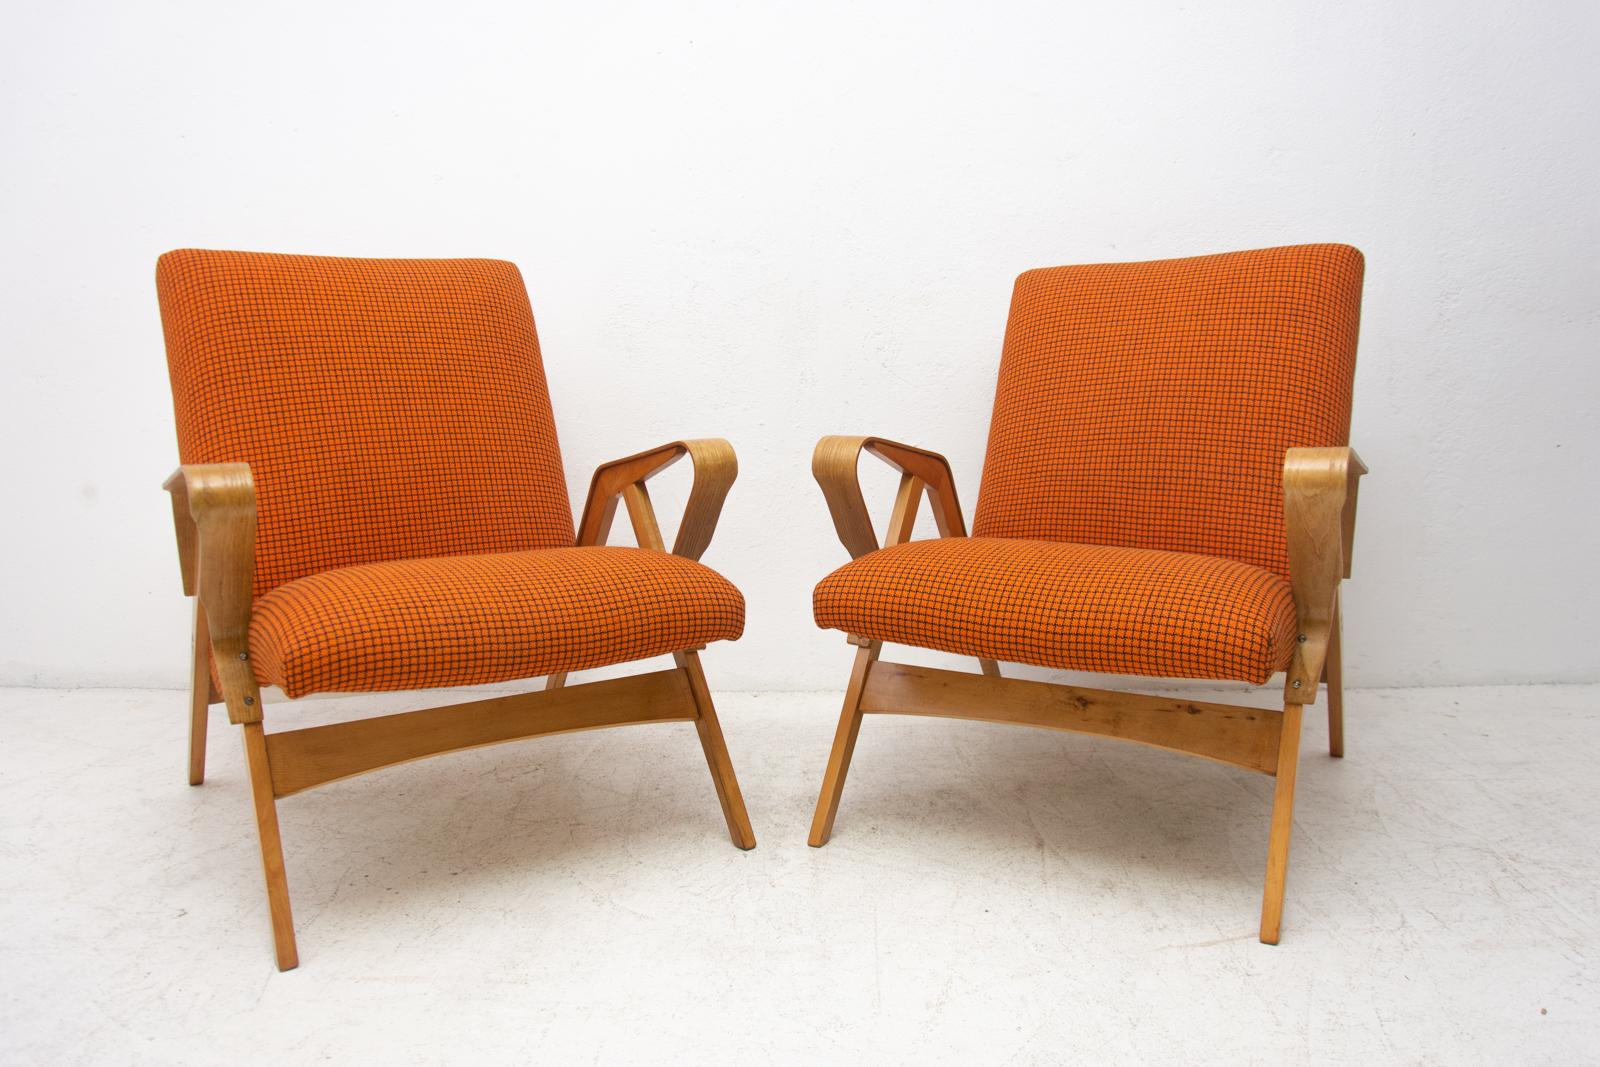 These Czechoslovak lounge armchairs No.24-23 were designed by František Jirák for Tatra Nabytok in the former Czechoslovakia in the 1960s. The design of these chairs followed the huge success of the Czechoslovak pavilion at the Brussels Expo